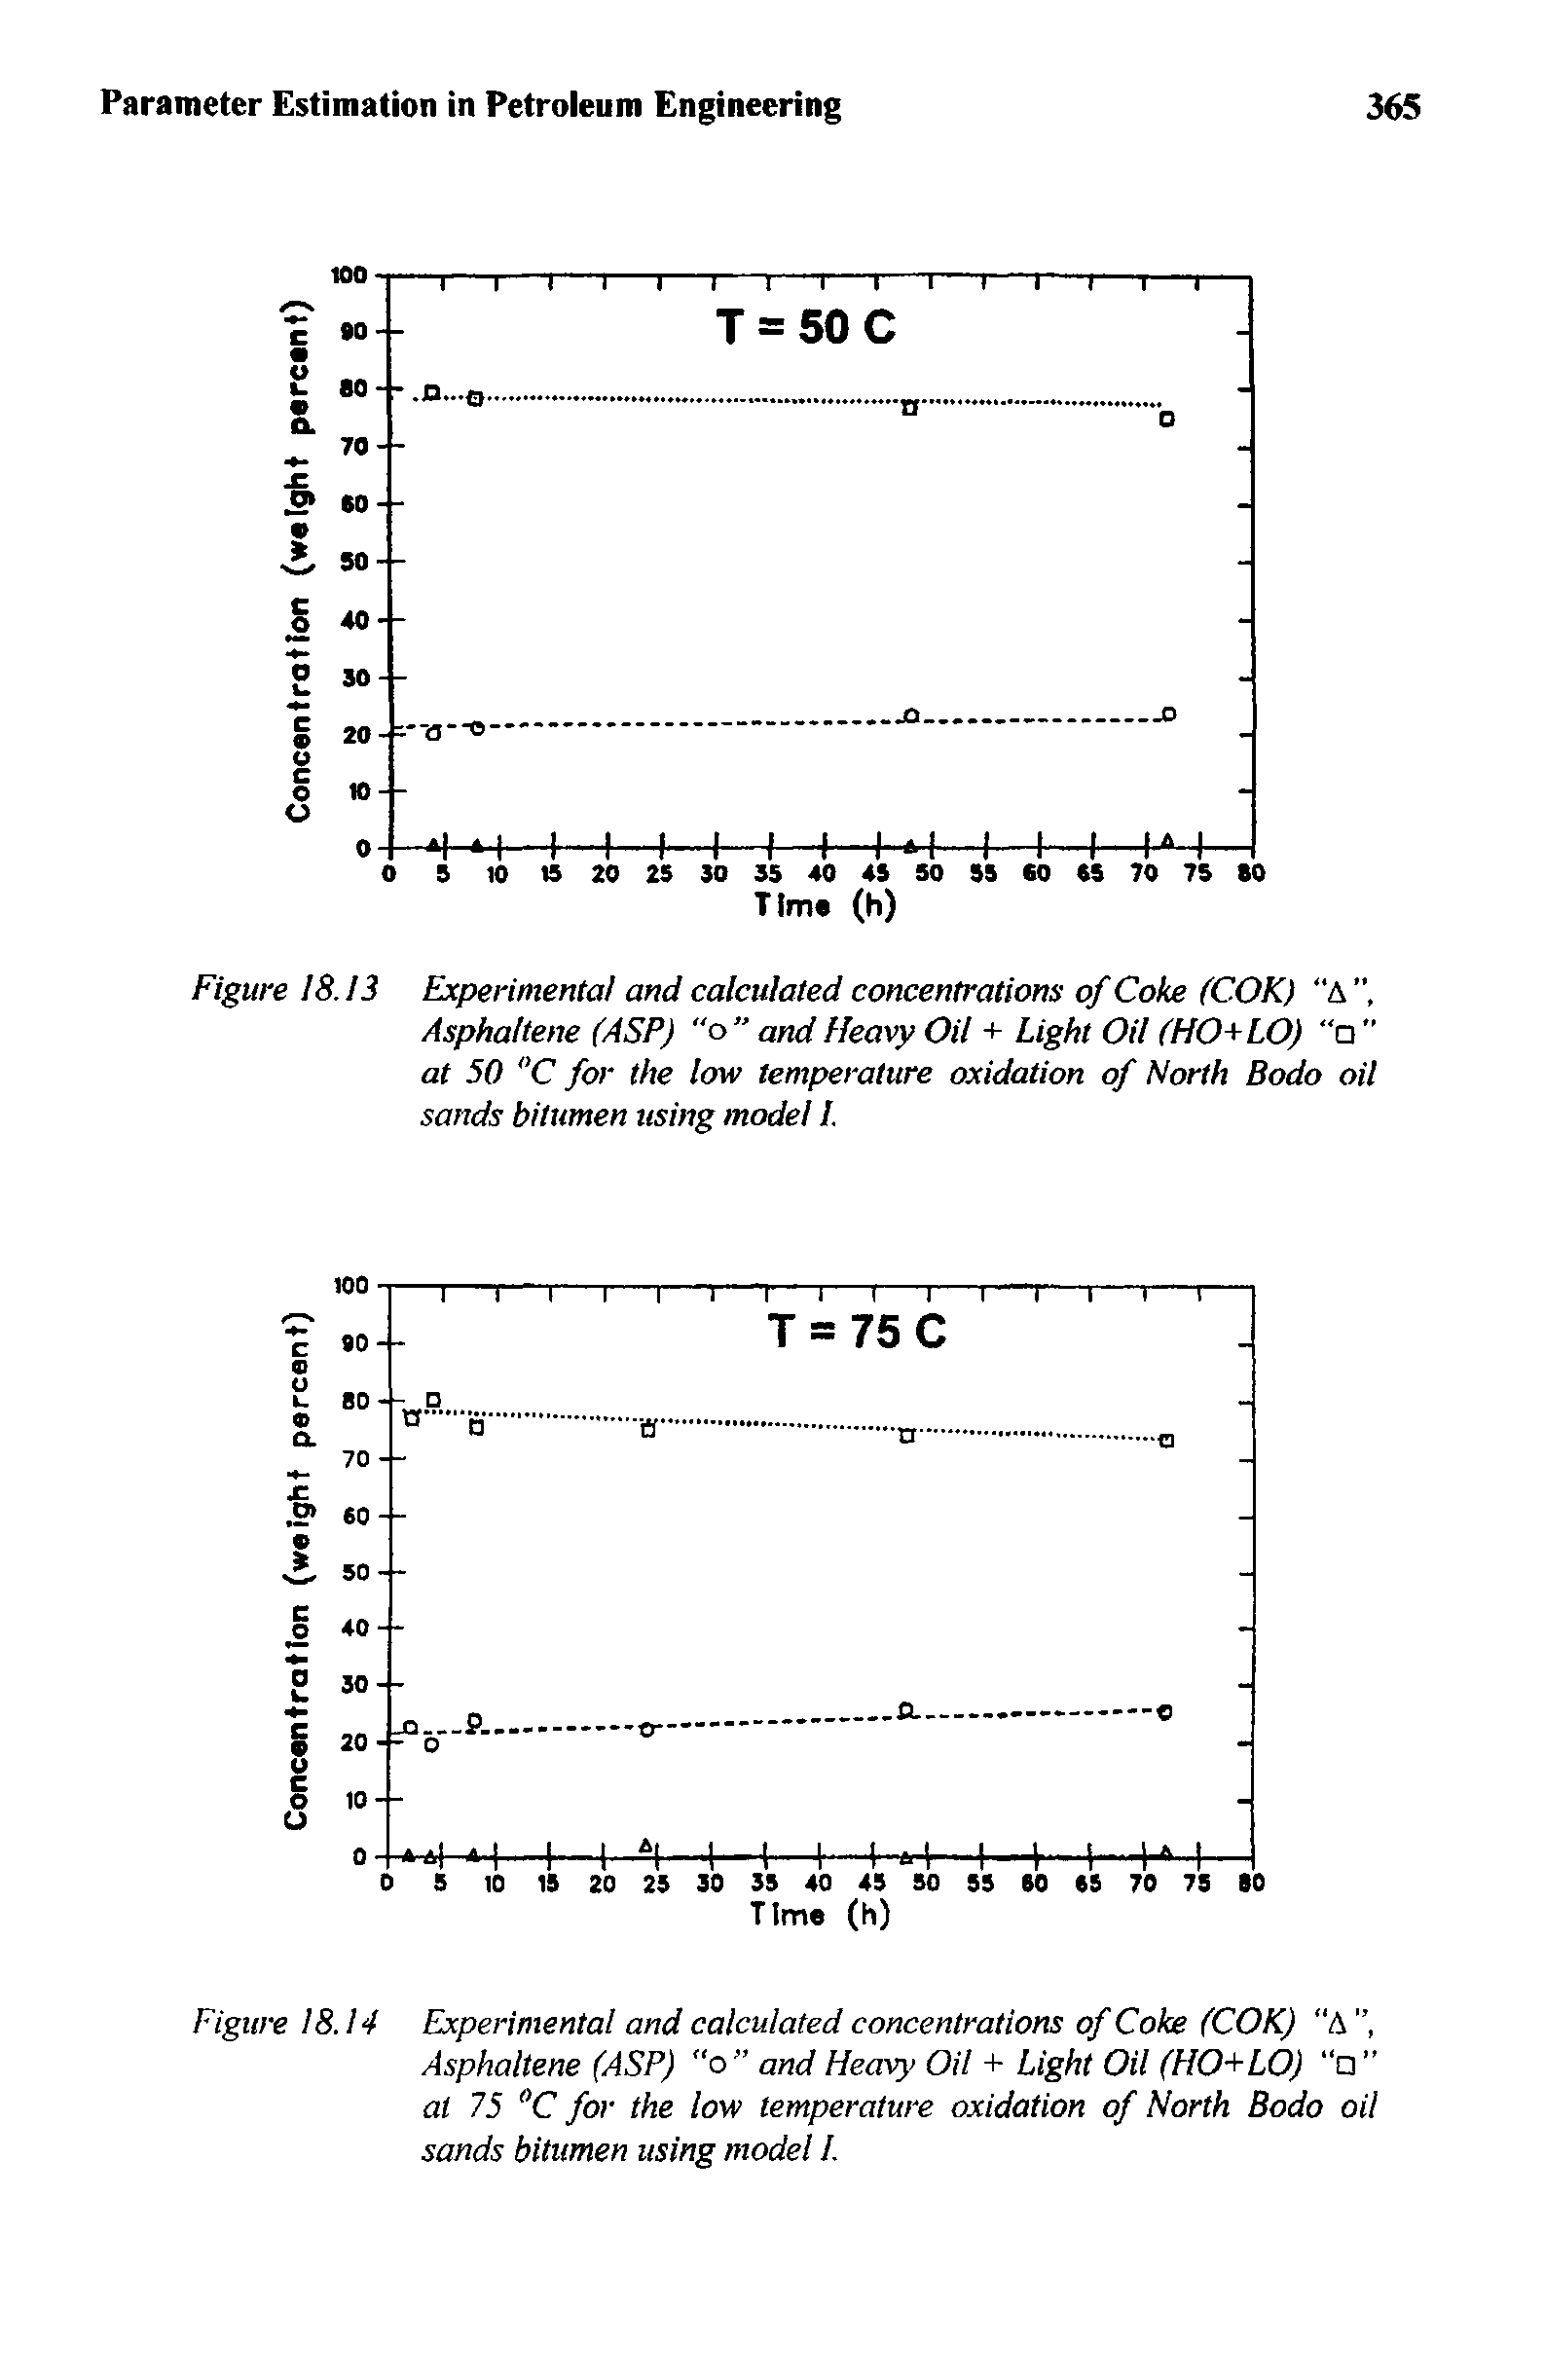 Figure 18.13 Experimental and calculated concentrations of Coke (COK) "A , Asphaltene (ASP) o" and Heavy Oil + Light Oil (HO+LO) "a" at 50 °C for the low temperature oxidation of North Bodo oil sands bitumen using model l.